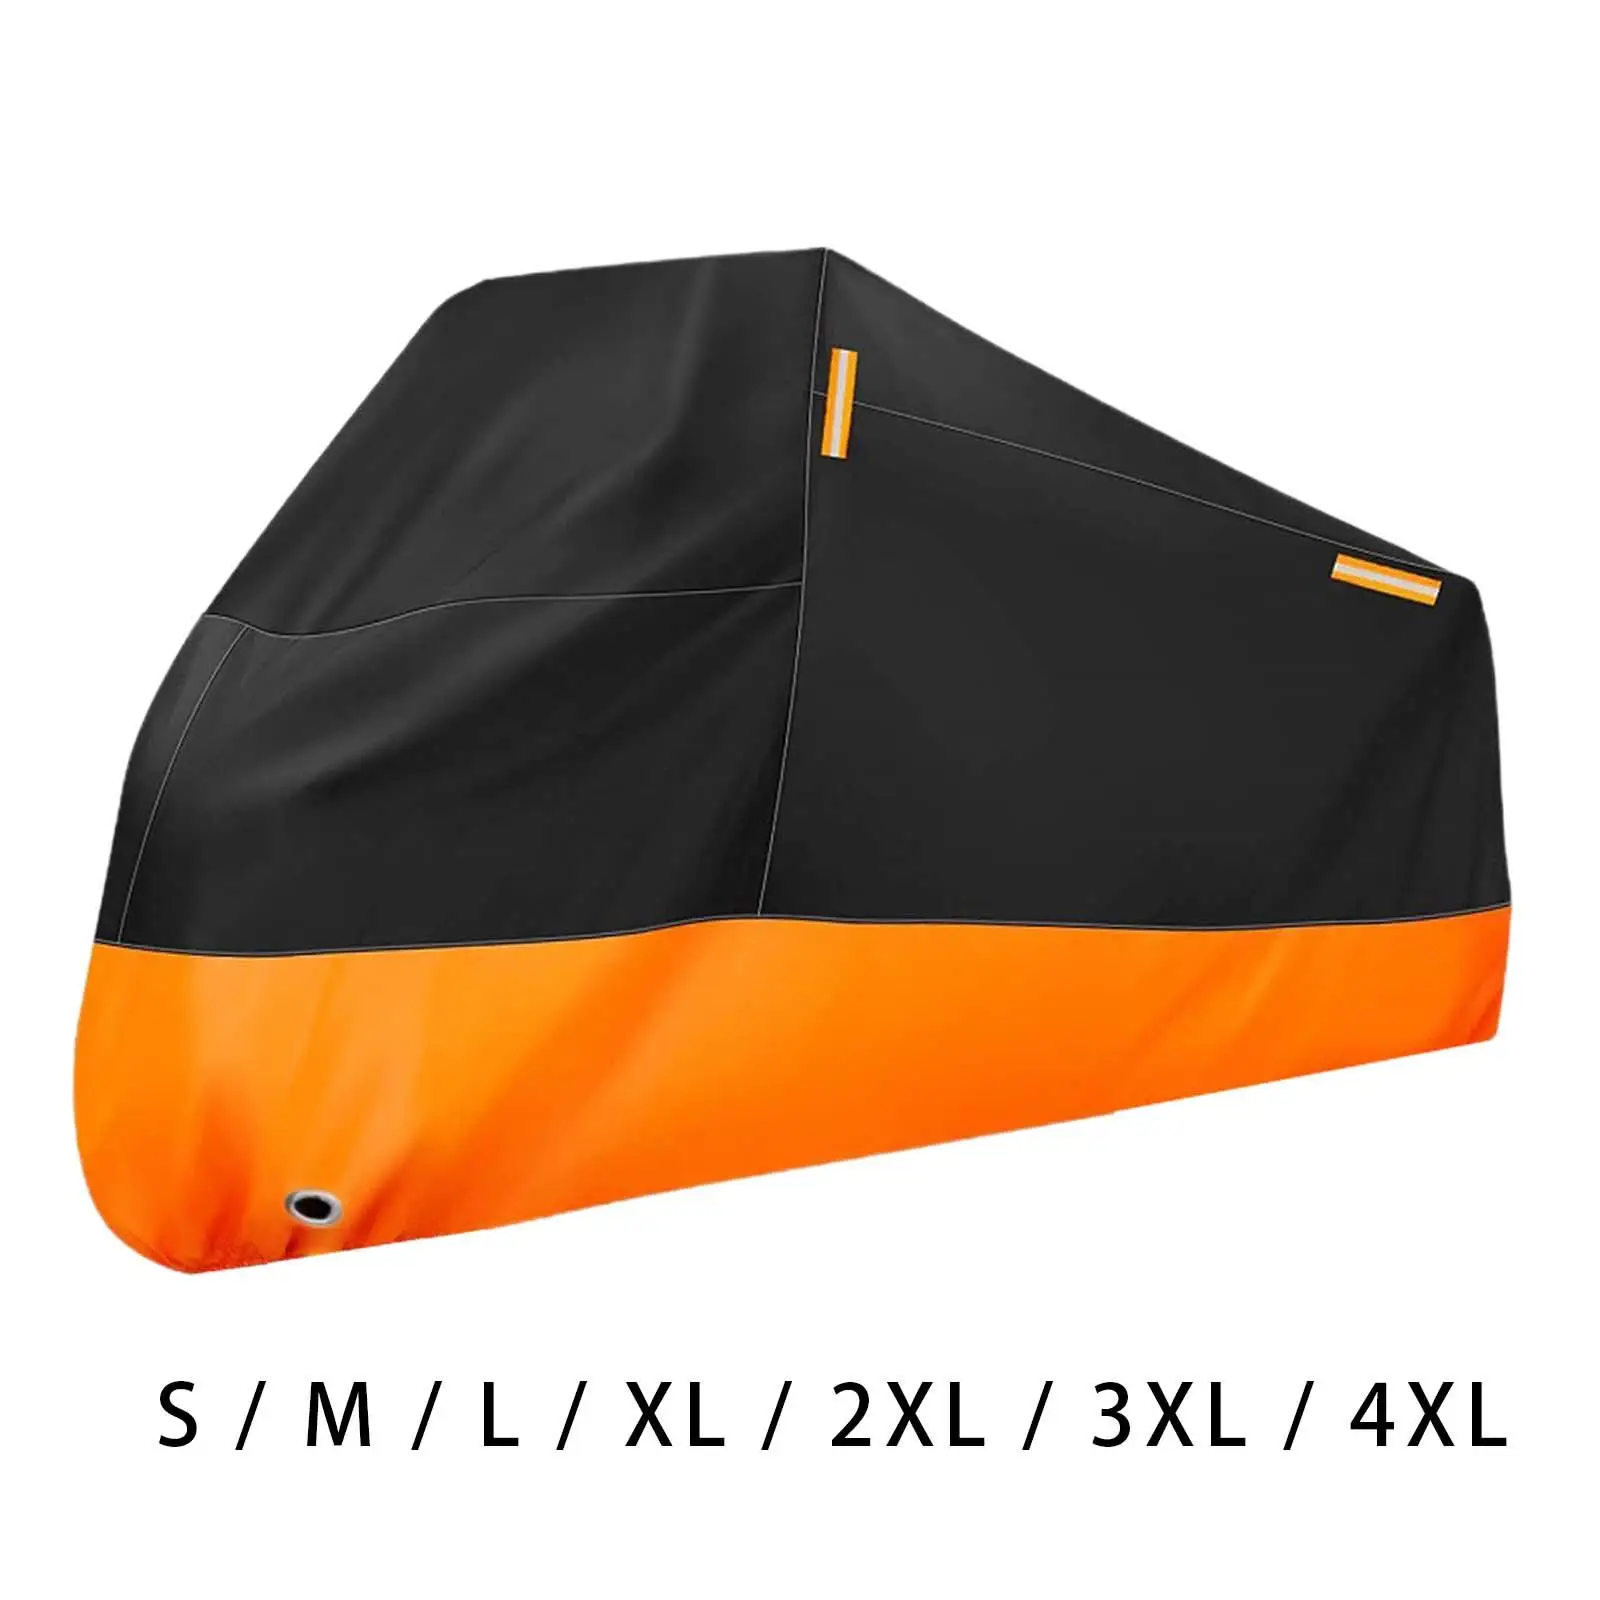 Universal Motorcycle Cover Waterproof Rain Dust Sun Outdoor Protection All Season with Reflective Strips Durable Motorbike Cover